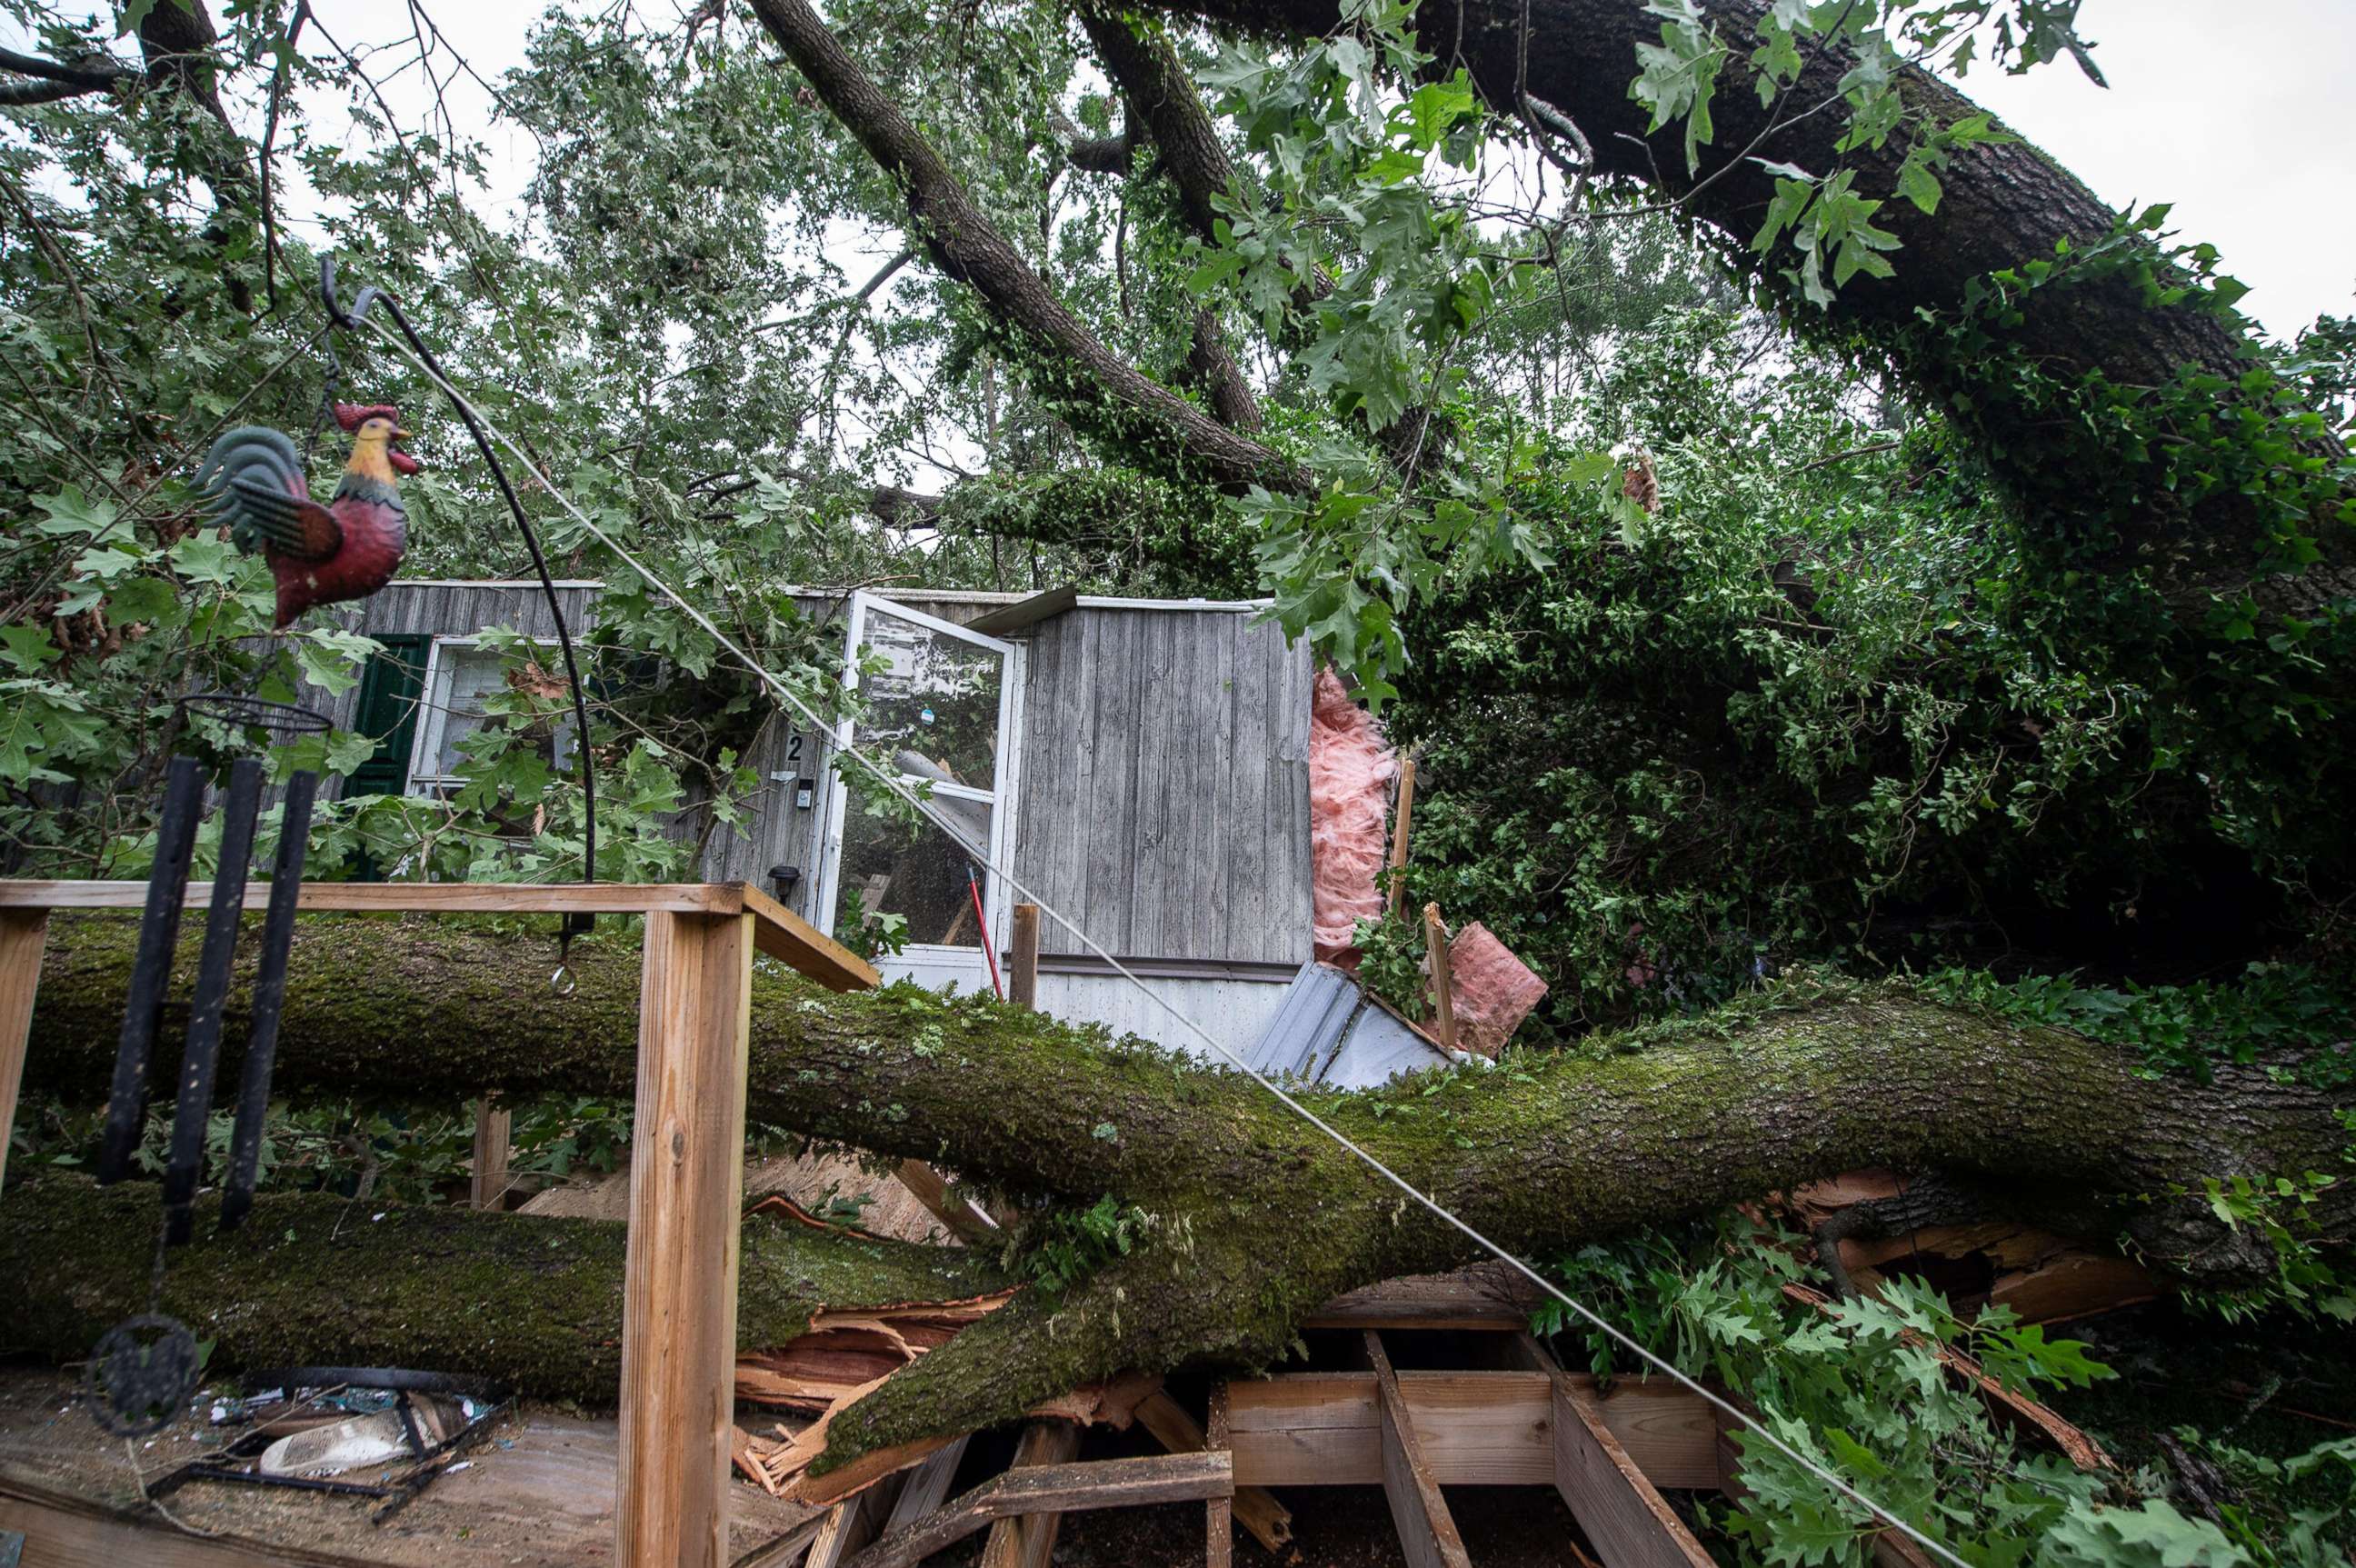 PHOTO:A fallen tree caused severe damage to a home on Meadow Lane in Byram, Miss., May 3, 2021, after a tornado touched down in the area Sunday night.